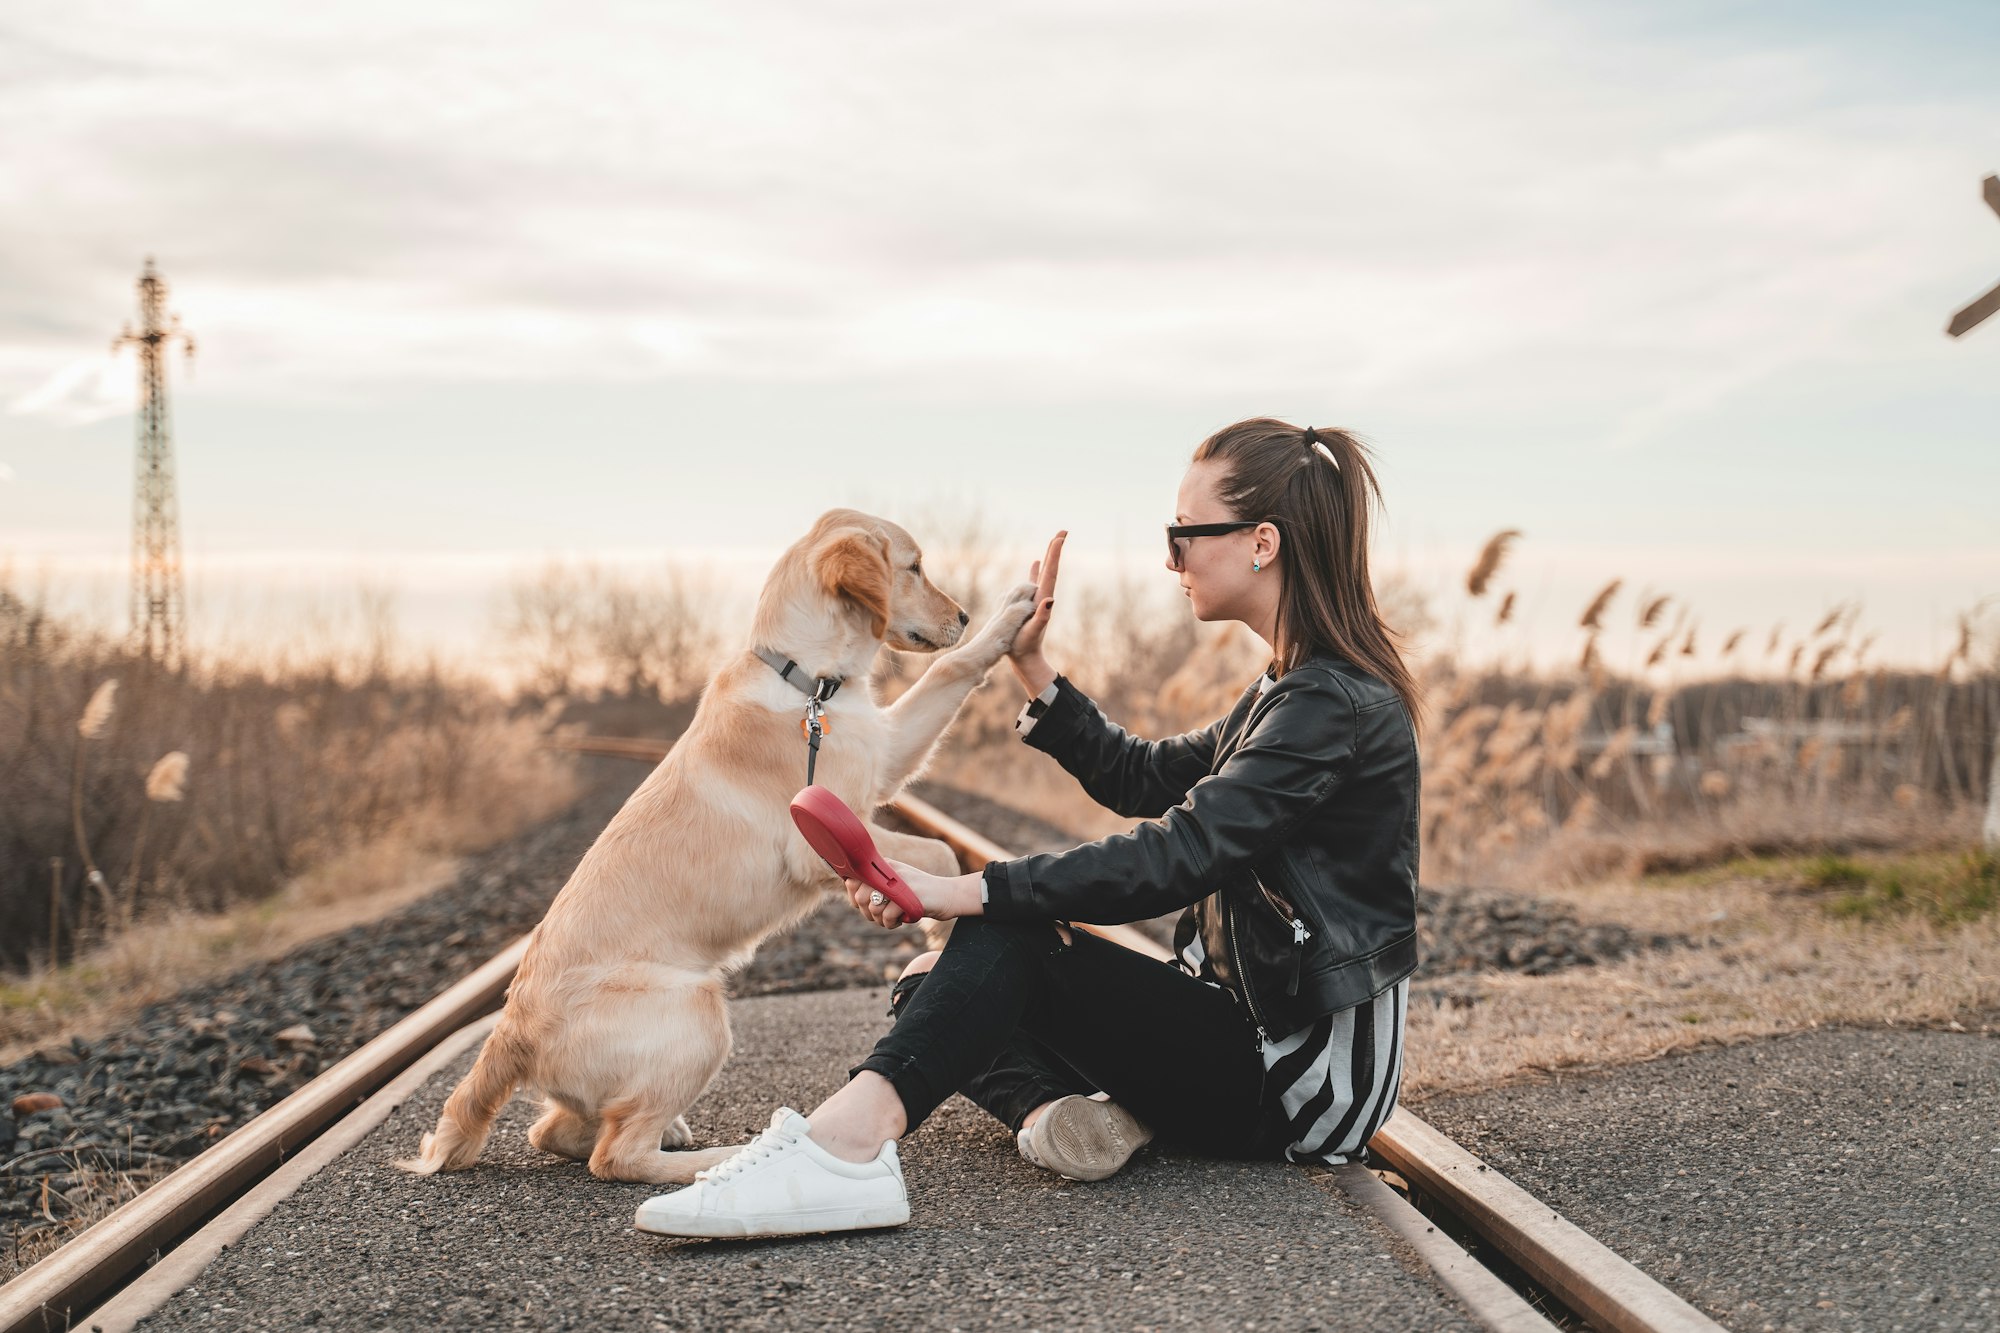 Building trust and respect with dog